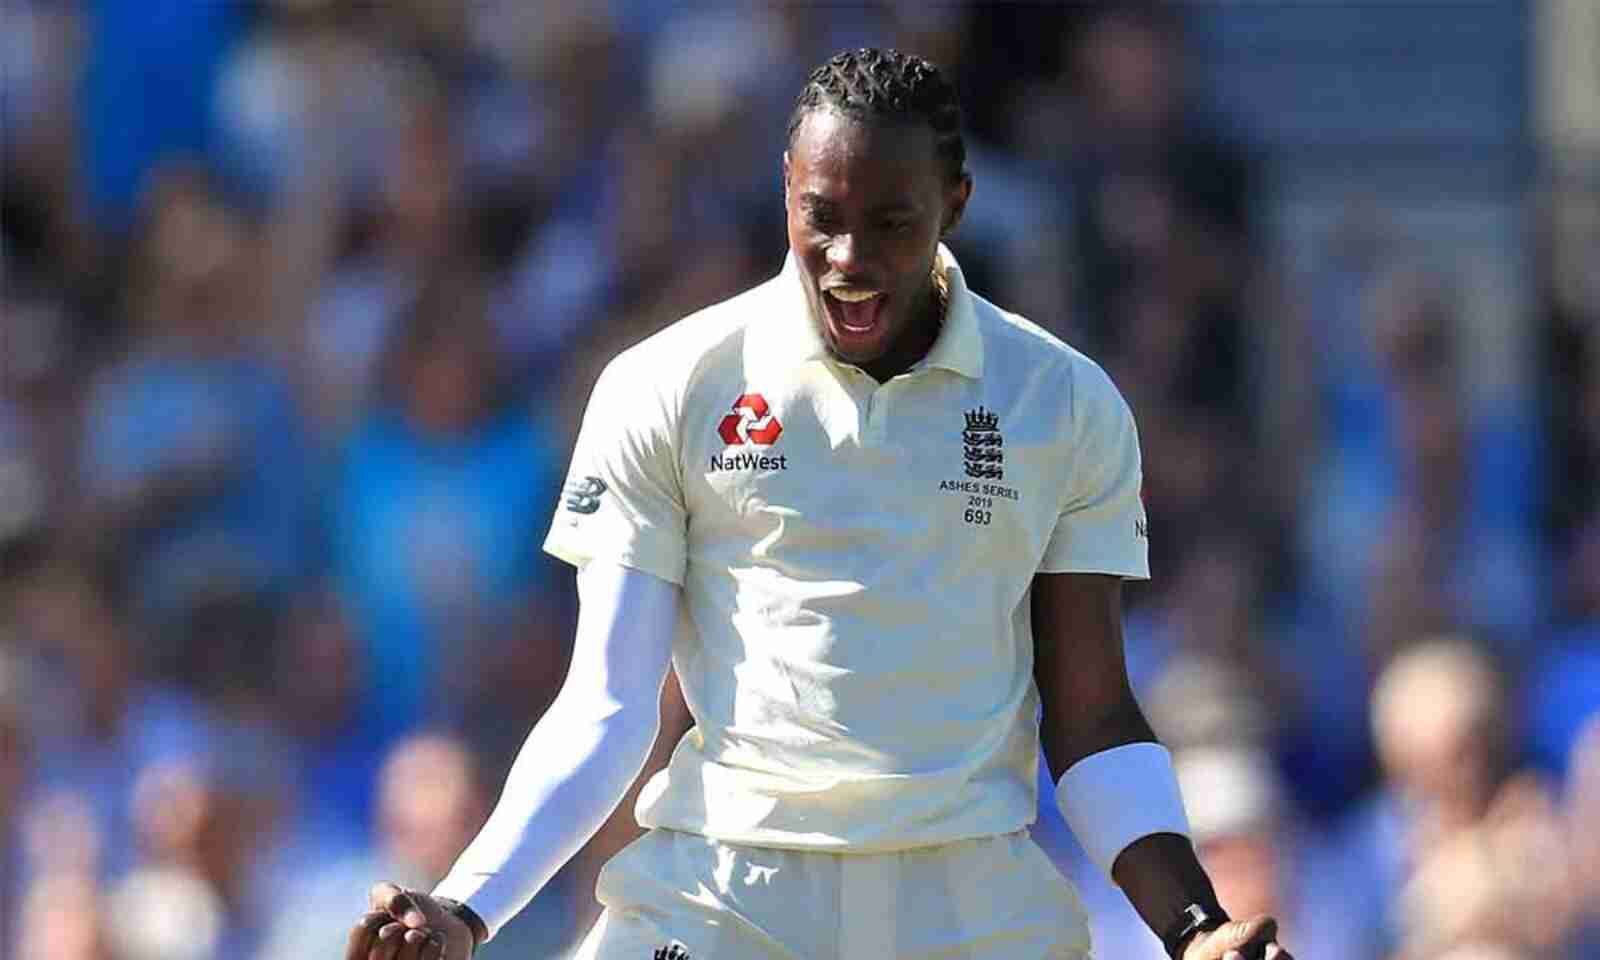 Jofra Archer needs support over racist abuse, says Jason Holder | Cricket  News - Times of India